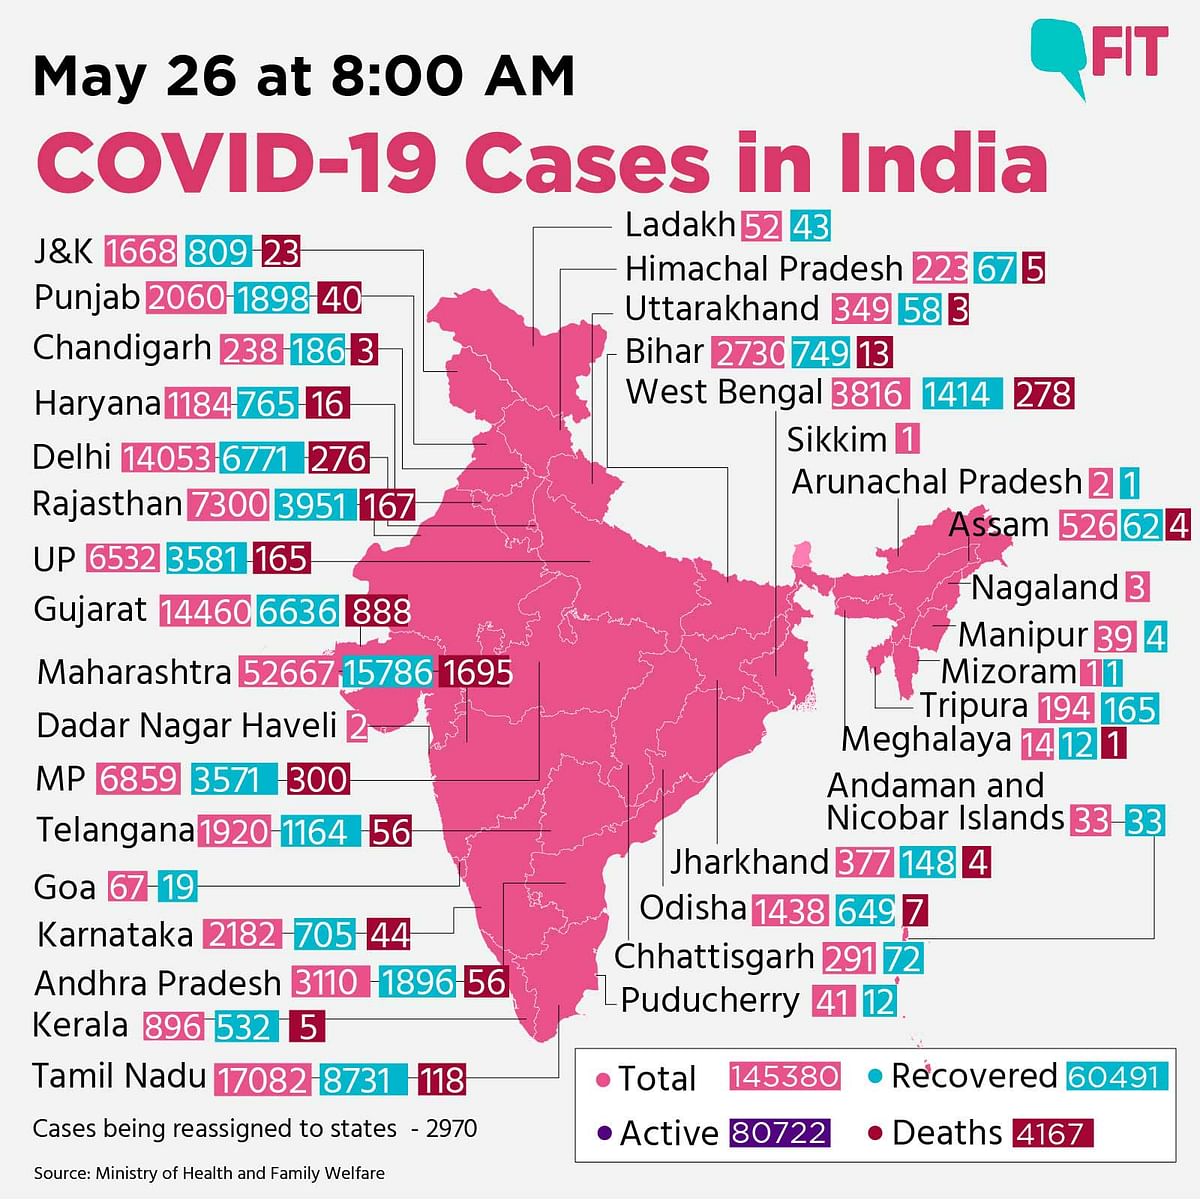 COVID-19 India Updates: 80722 Active Cases; 4167 Deaths 